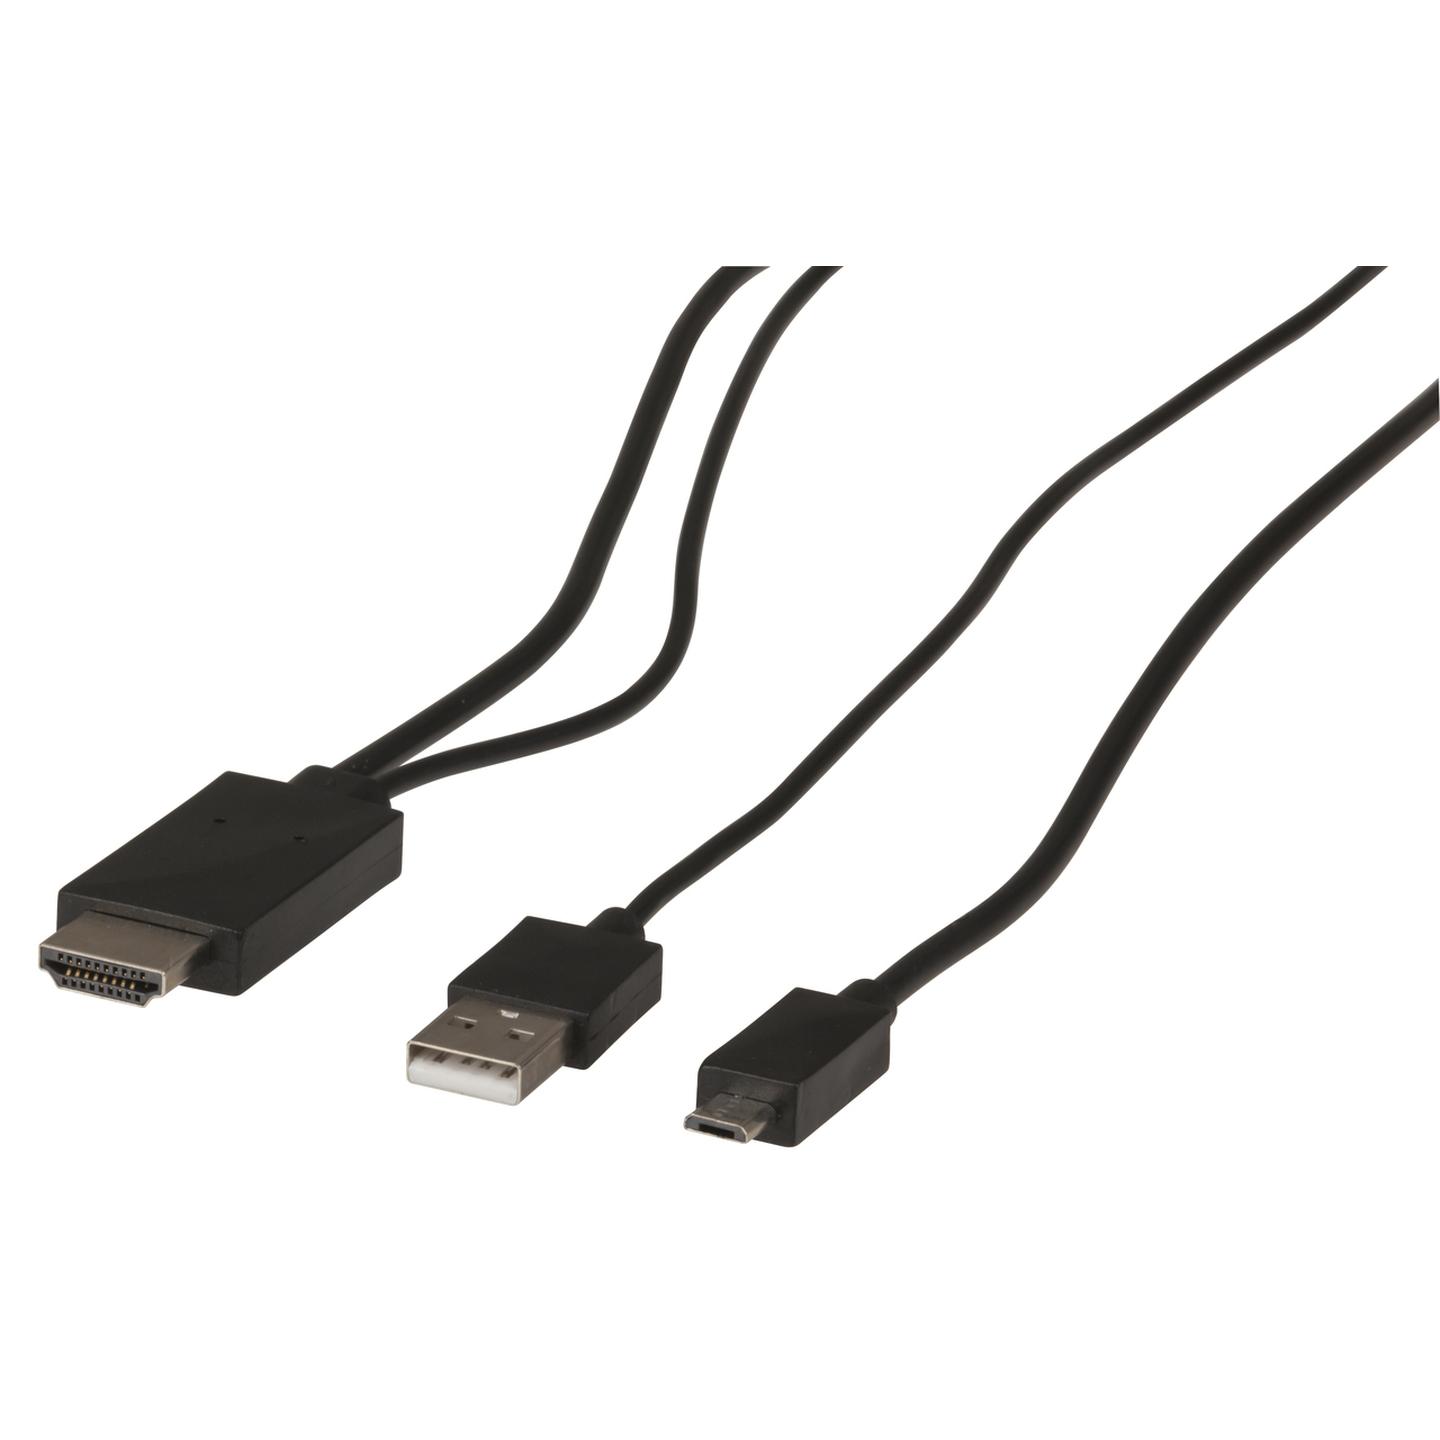 MHL to HDMI Cable with 11 Pin Samsung Adaptor - 2m